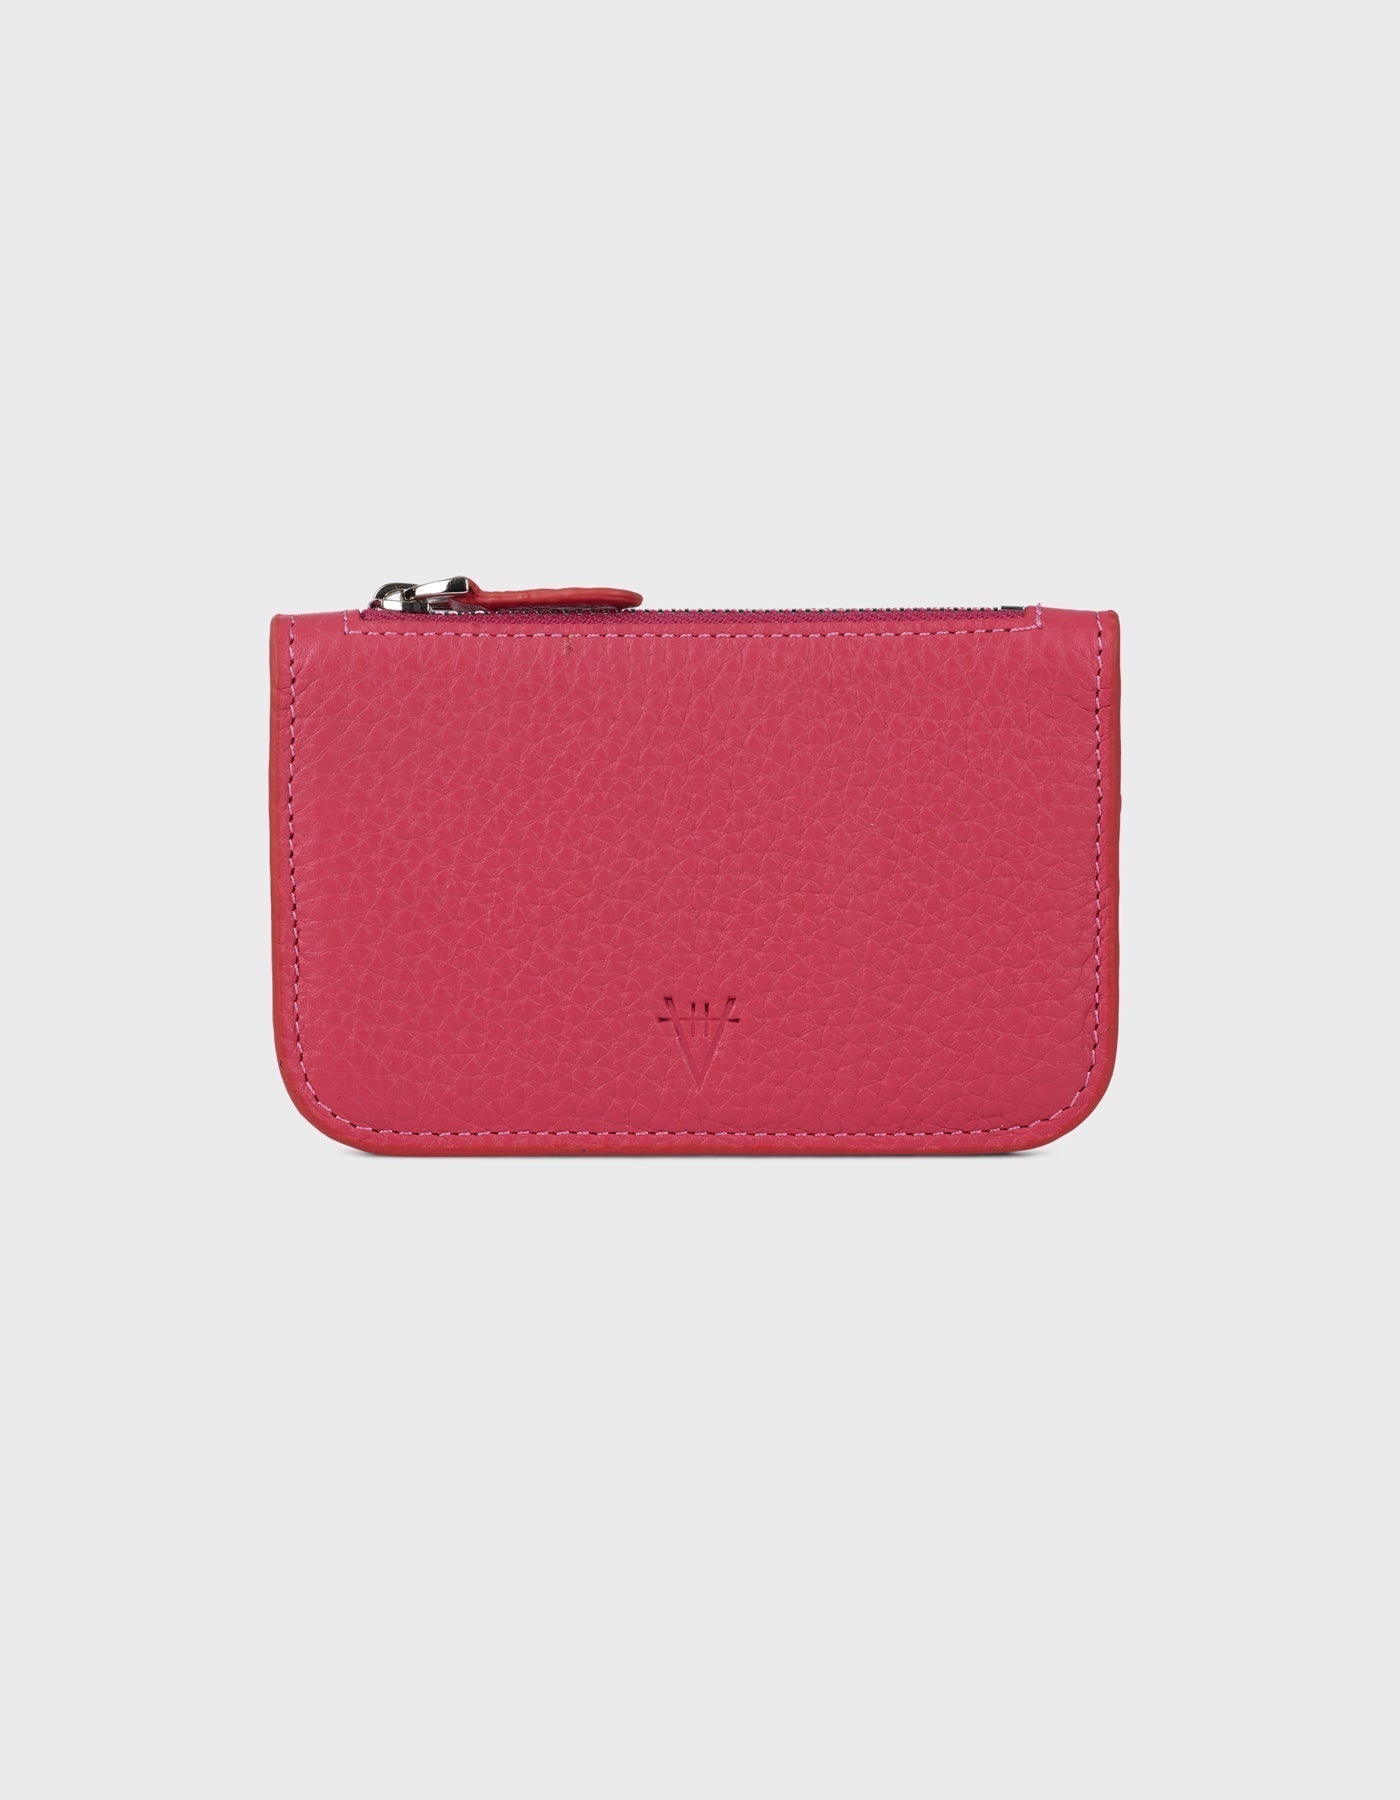 Hiva Atelier | Alae Coin Purse & Card Holder Coral | Beautiful and Versatile